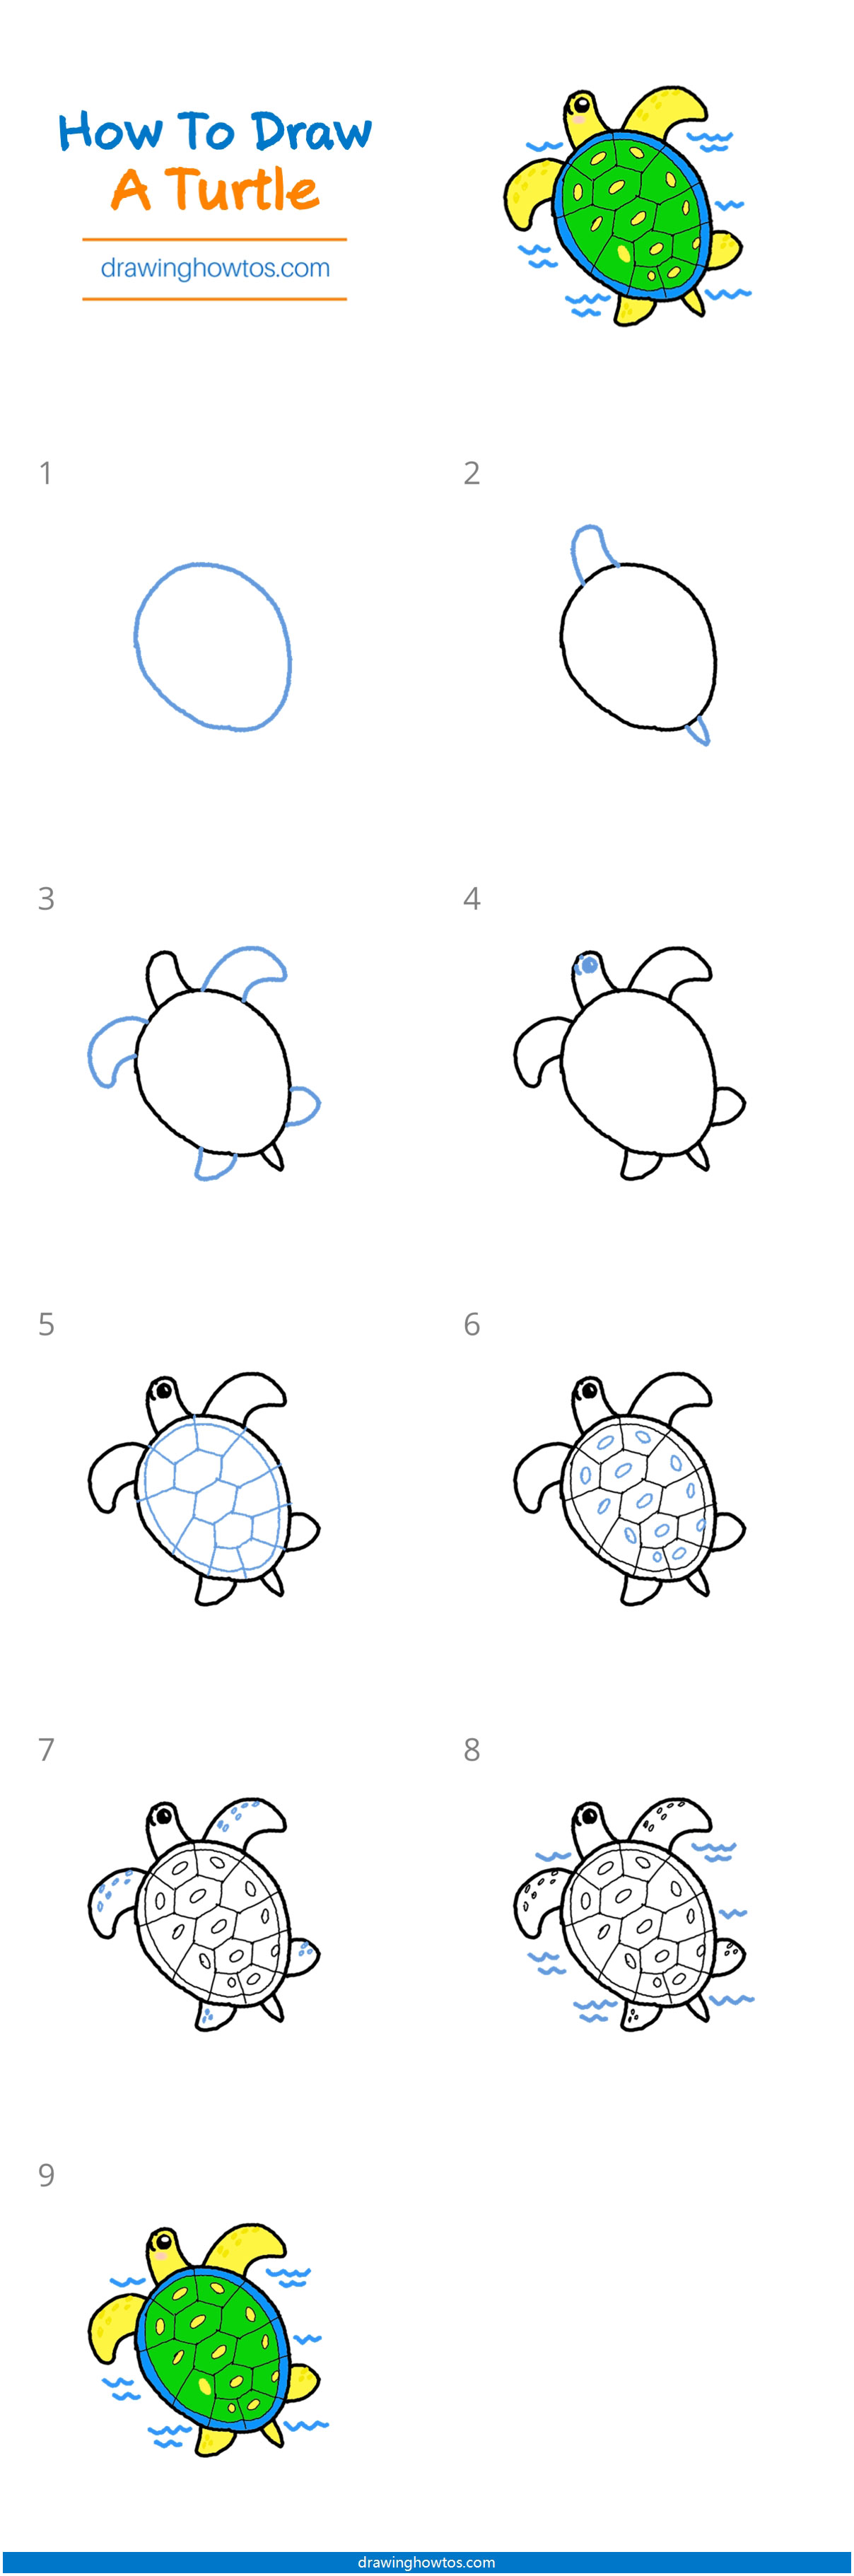 How to Draw a Turtle Step by Step Easy Drawing Guides Drawing Howtos